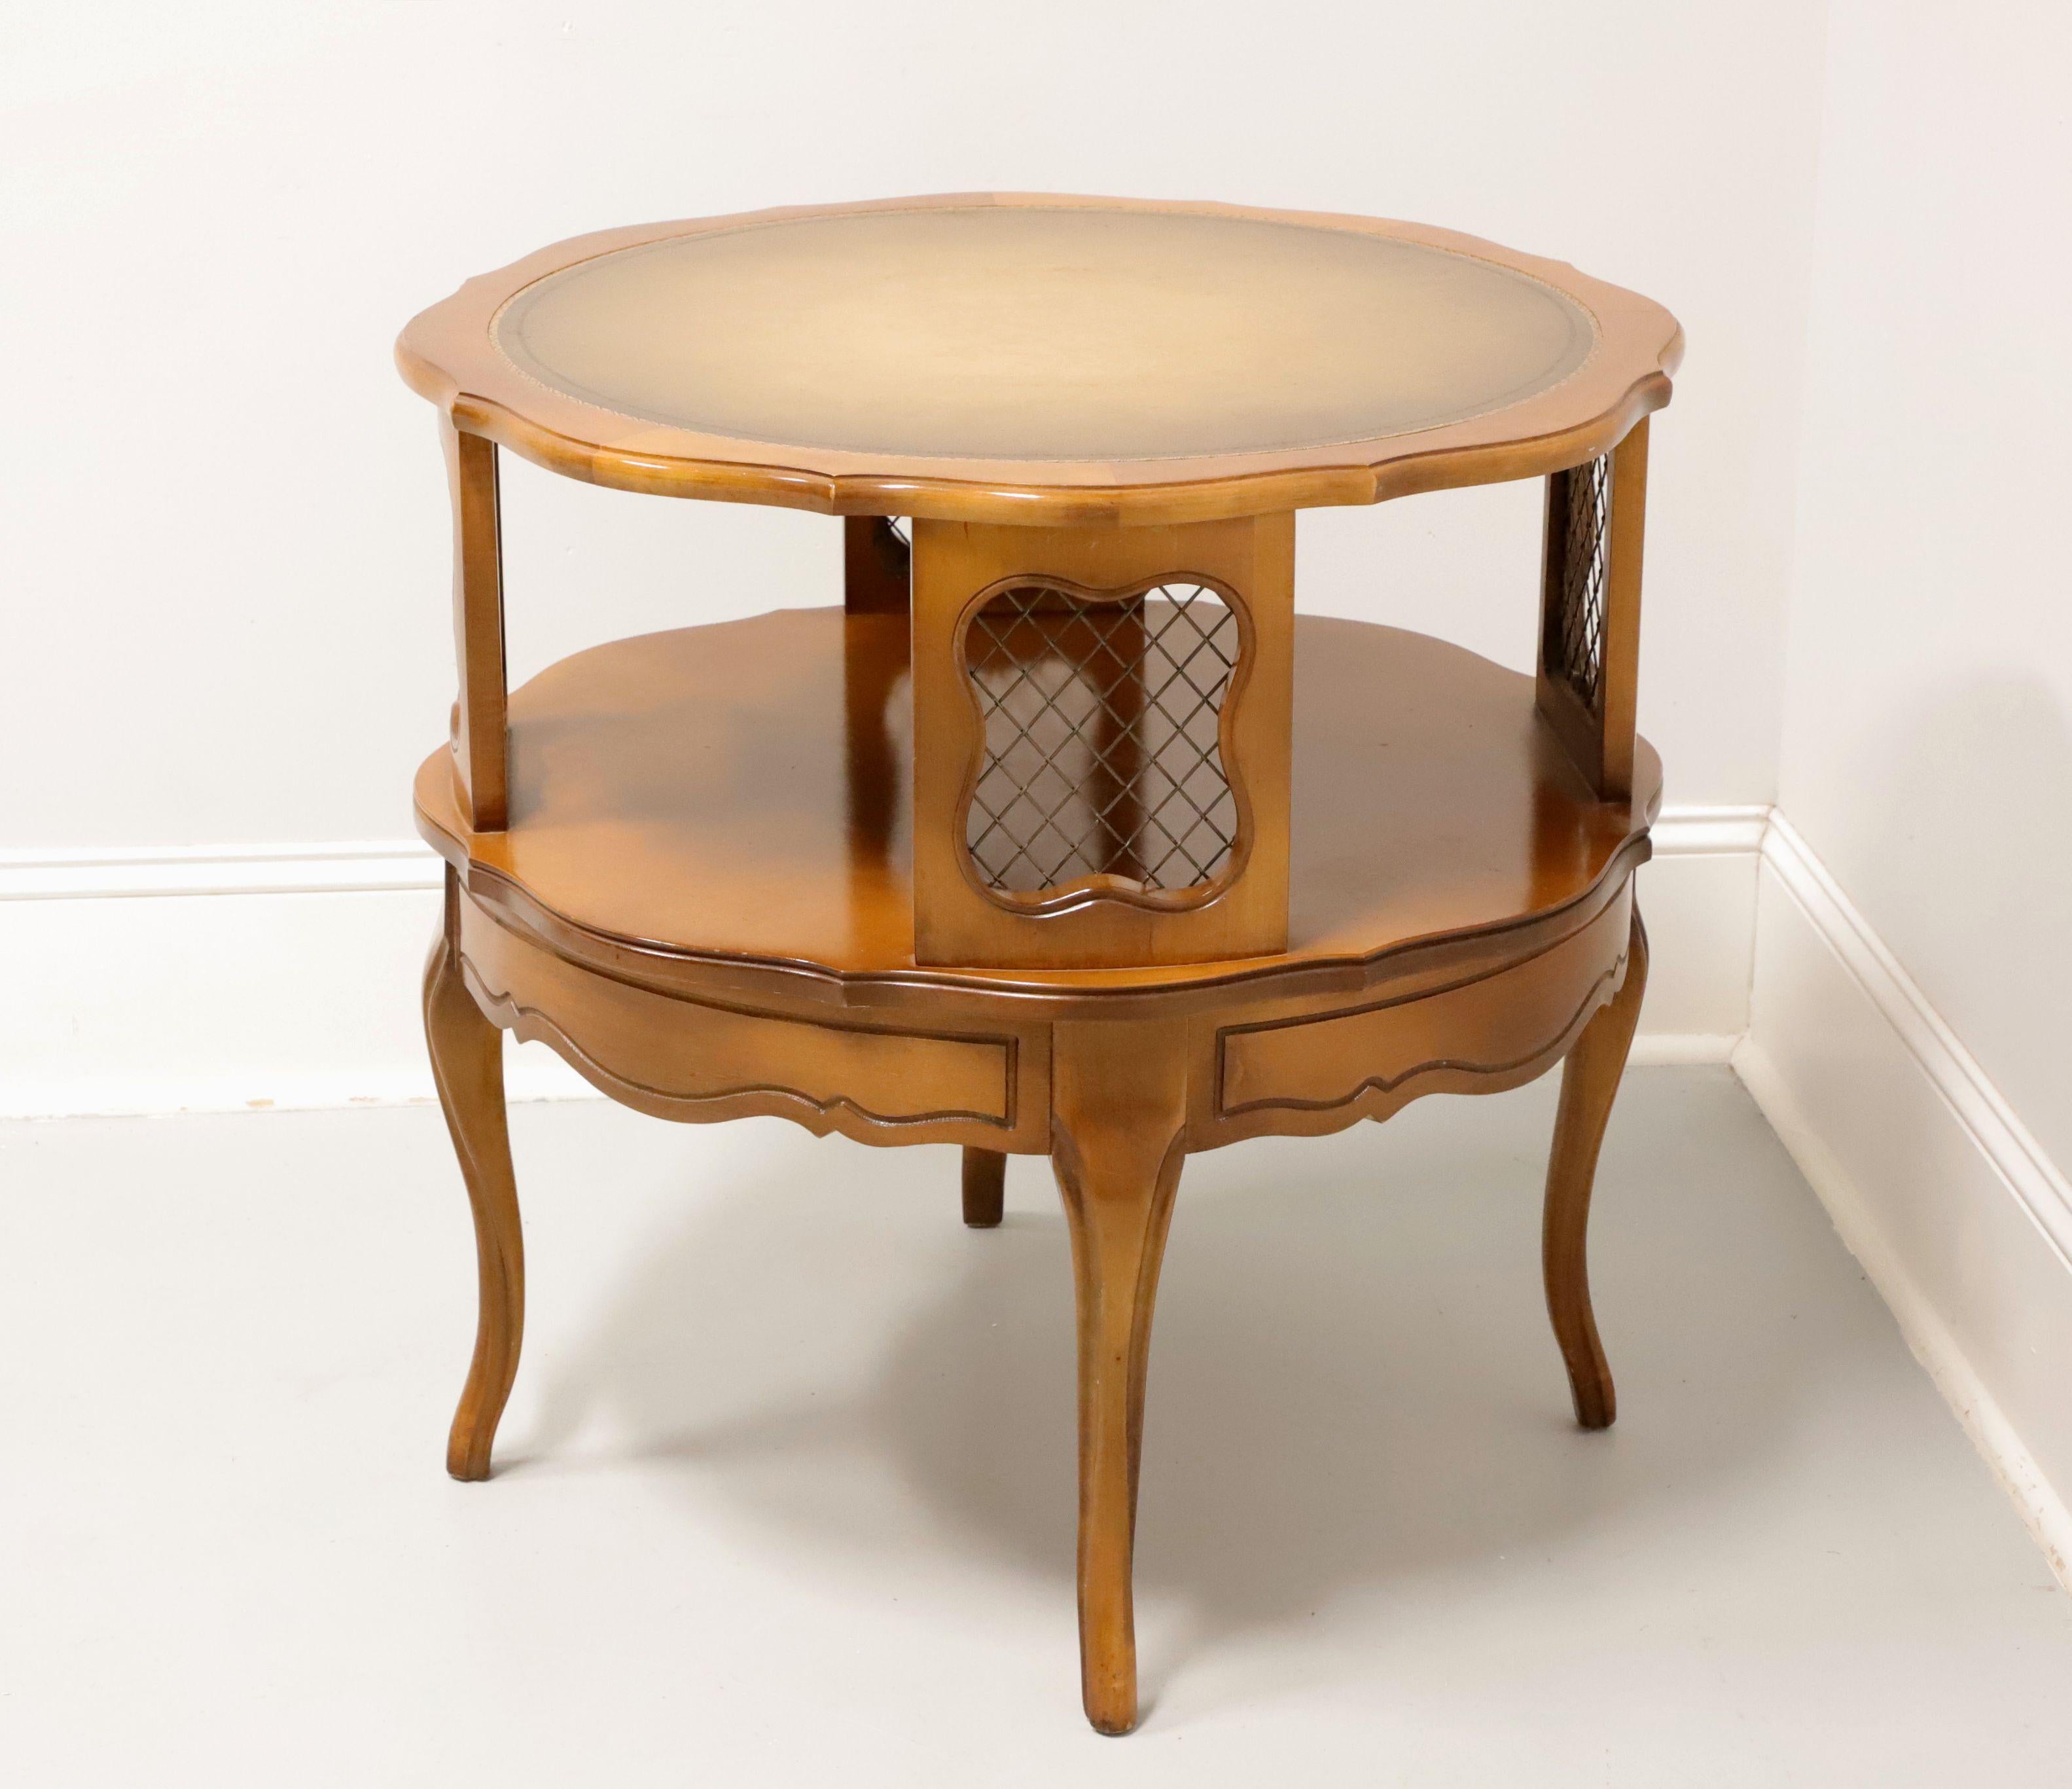 French Provincial Mid 20th Century Hardwood, Brass Mesh & Leather French Round Accent Table For Sale